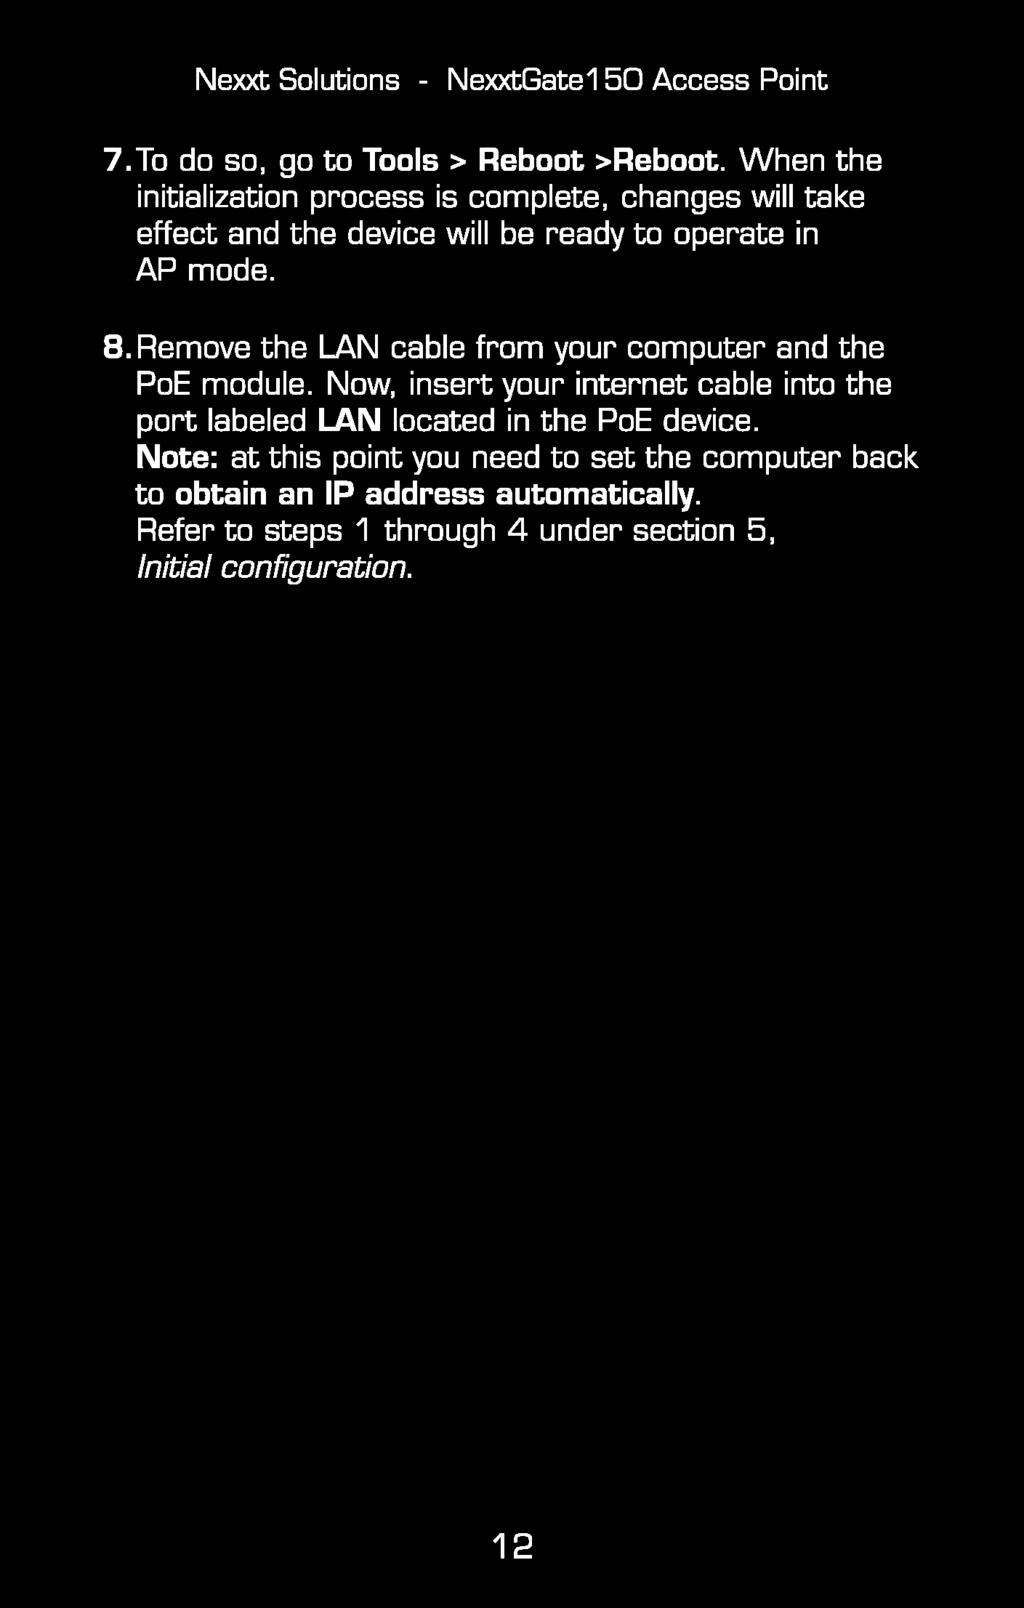 Remove the LAN cable from your computer and the PoE module. Now, insert your internet cable into the port labeled LAN located in the PoE device.